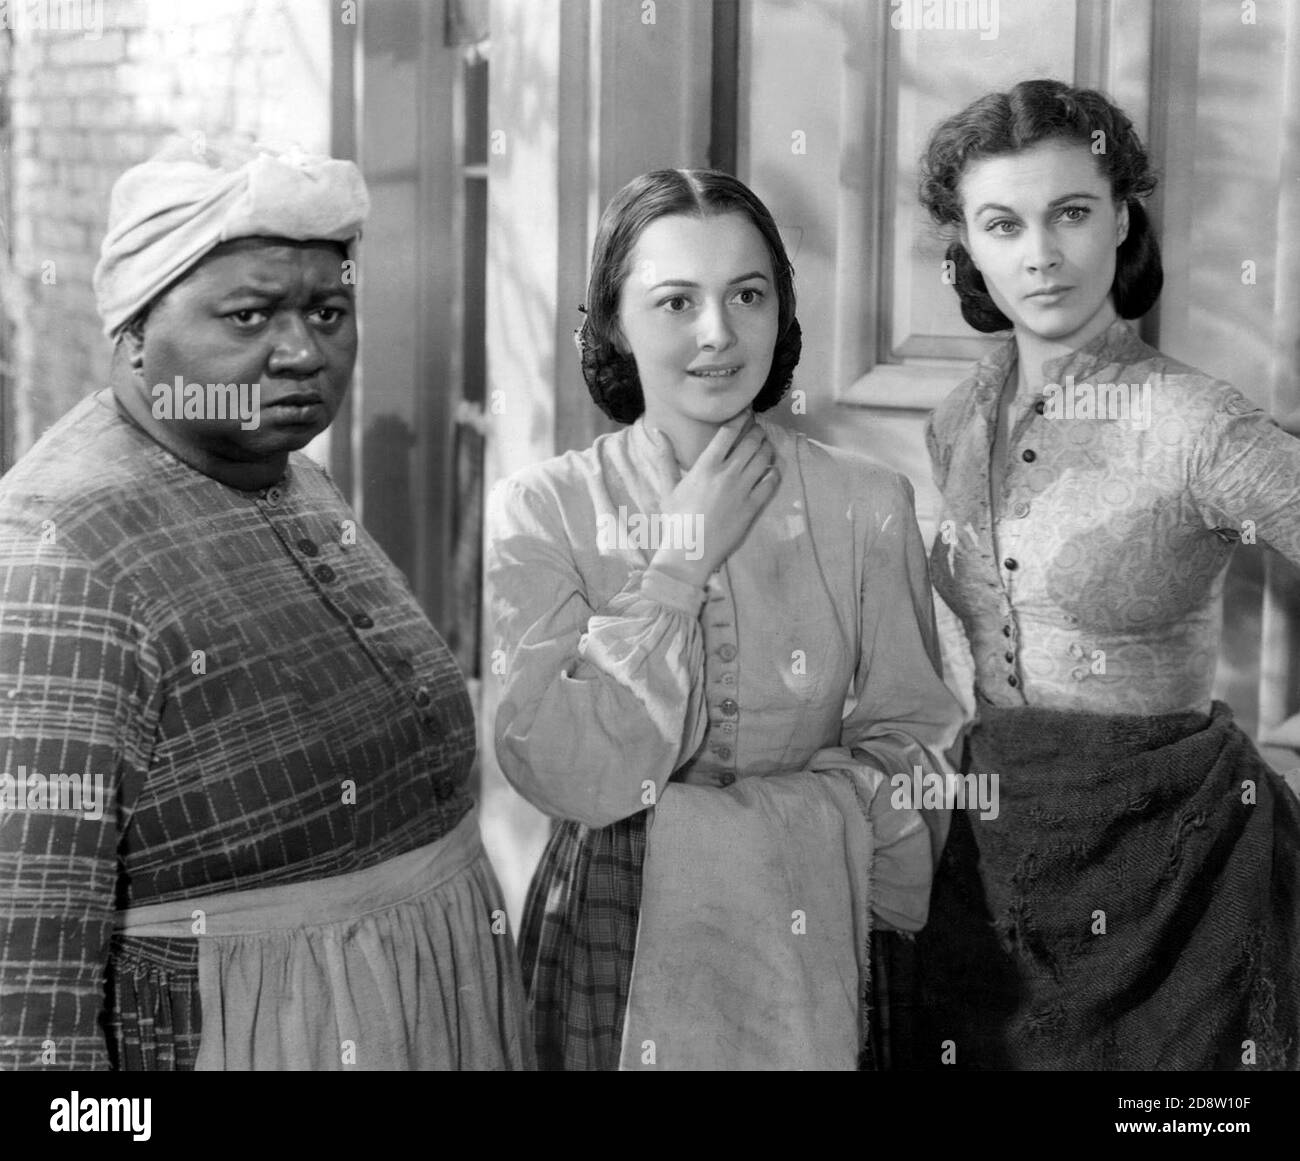 Hattie McDaniel, Olivia de Havilland and Vivien Leigh in a publicity photograph for the film 'Gone with the Wind', 1939 Stock Photo